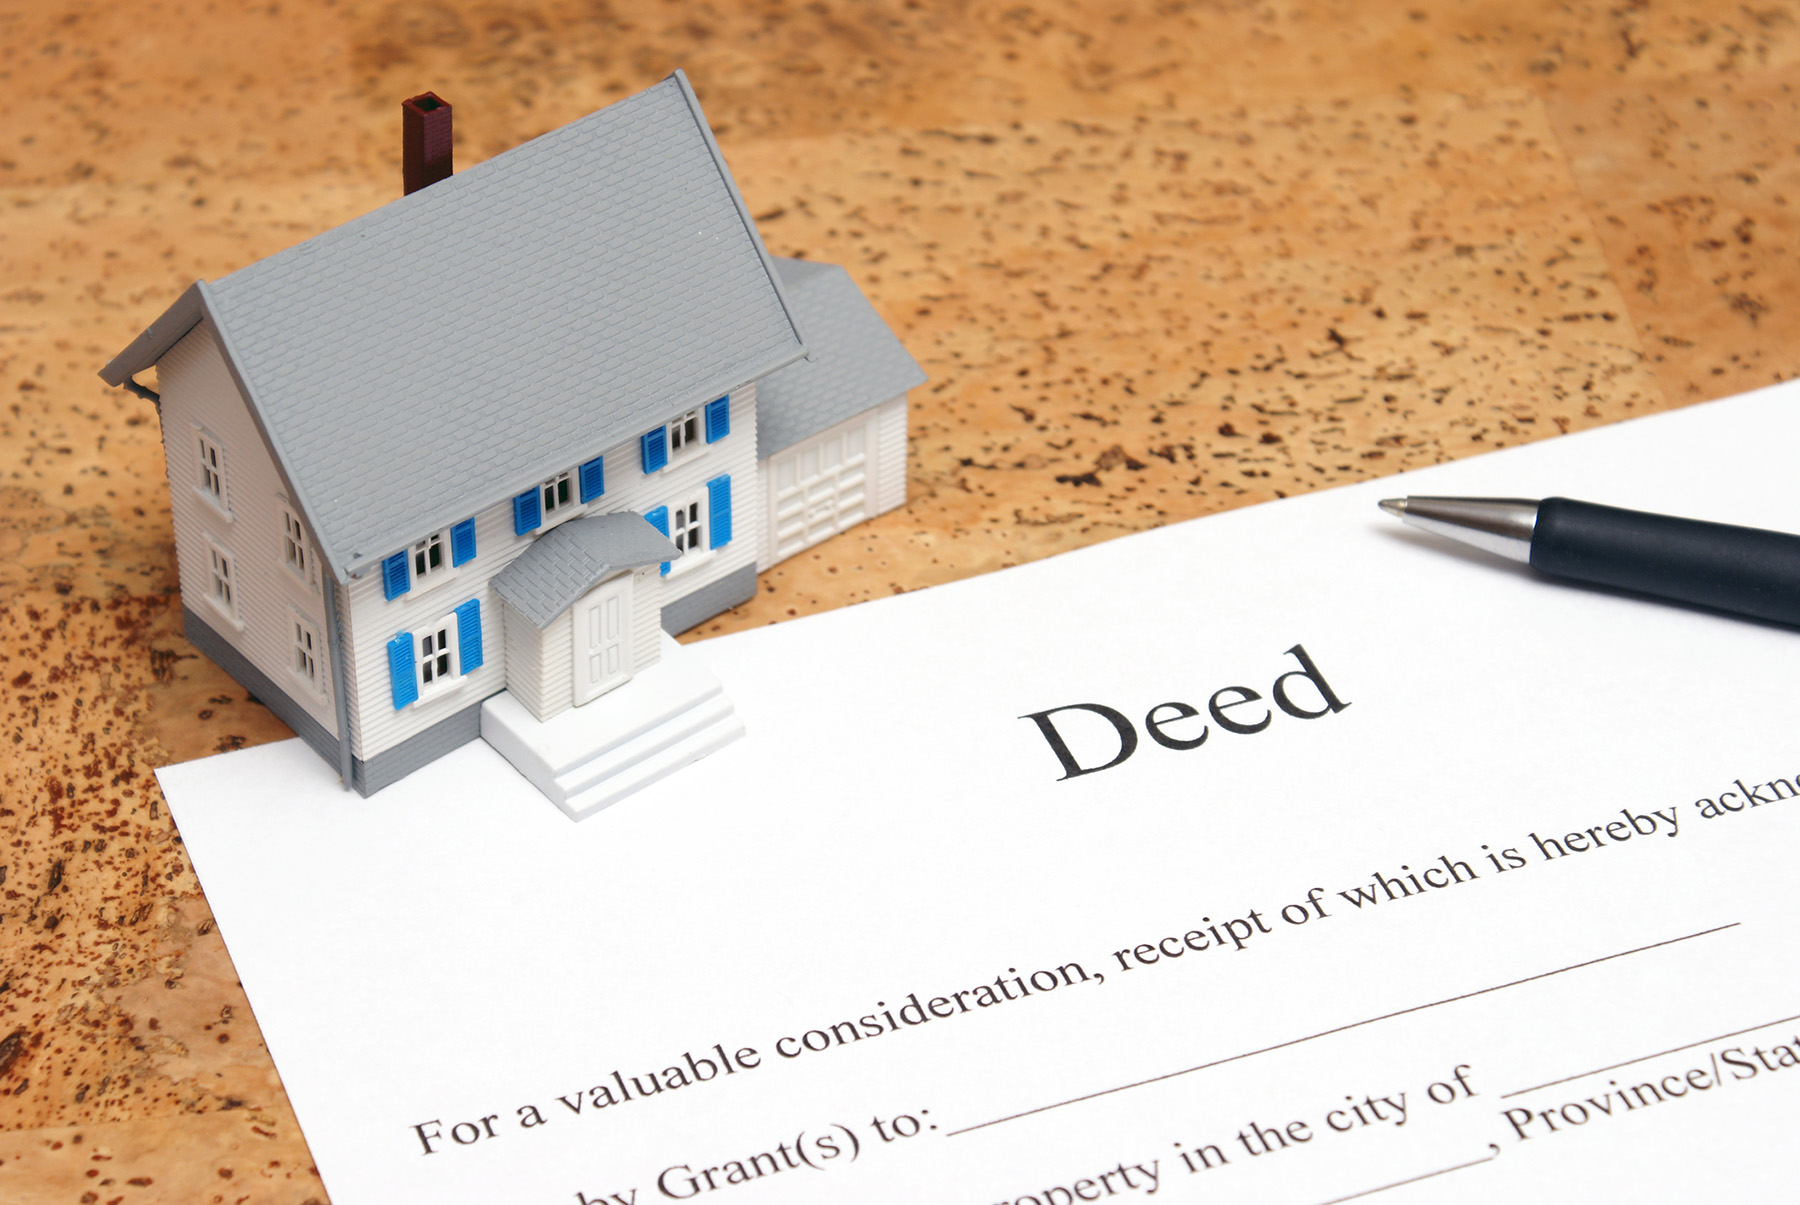 Can I sell a house without deeds?